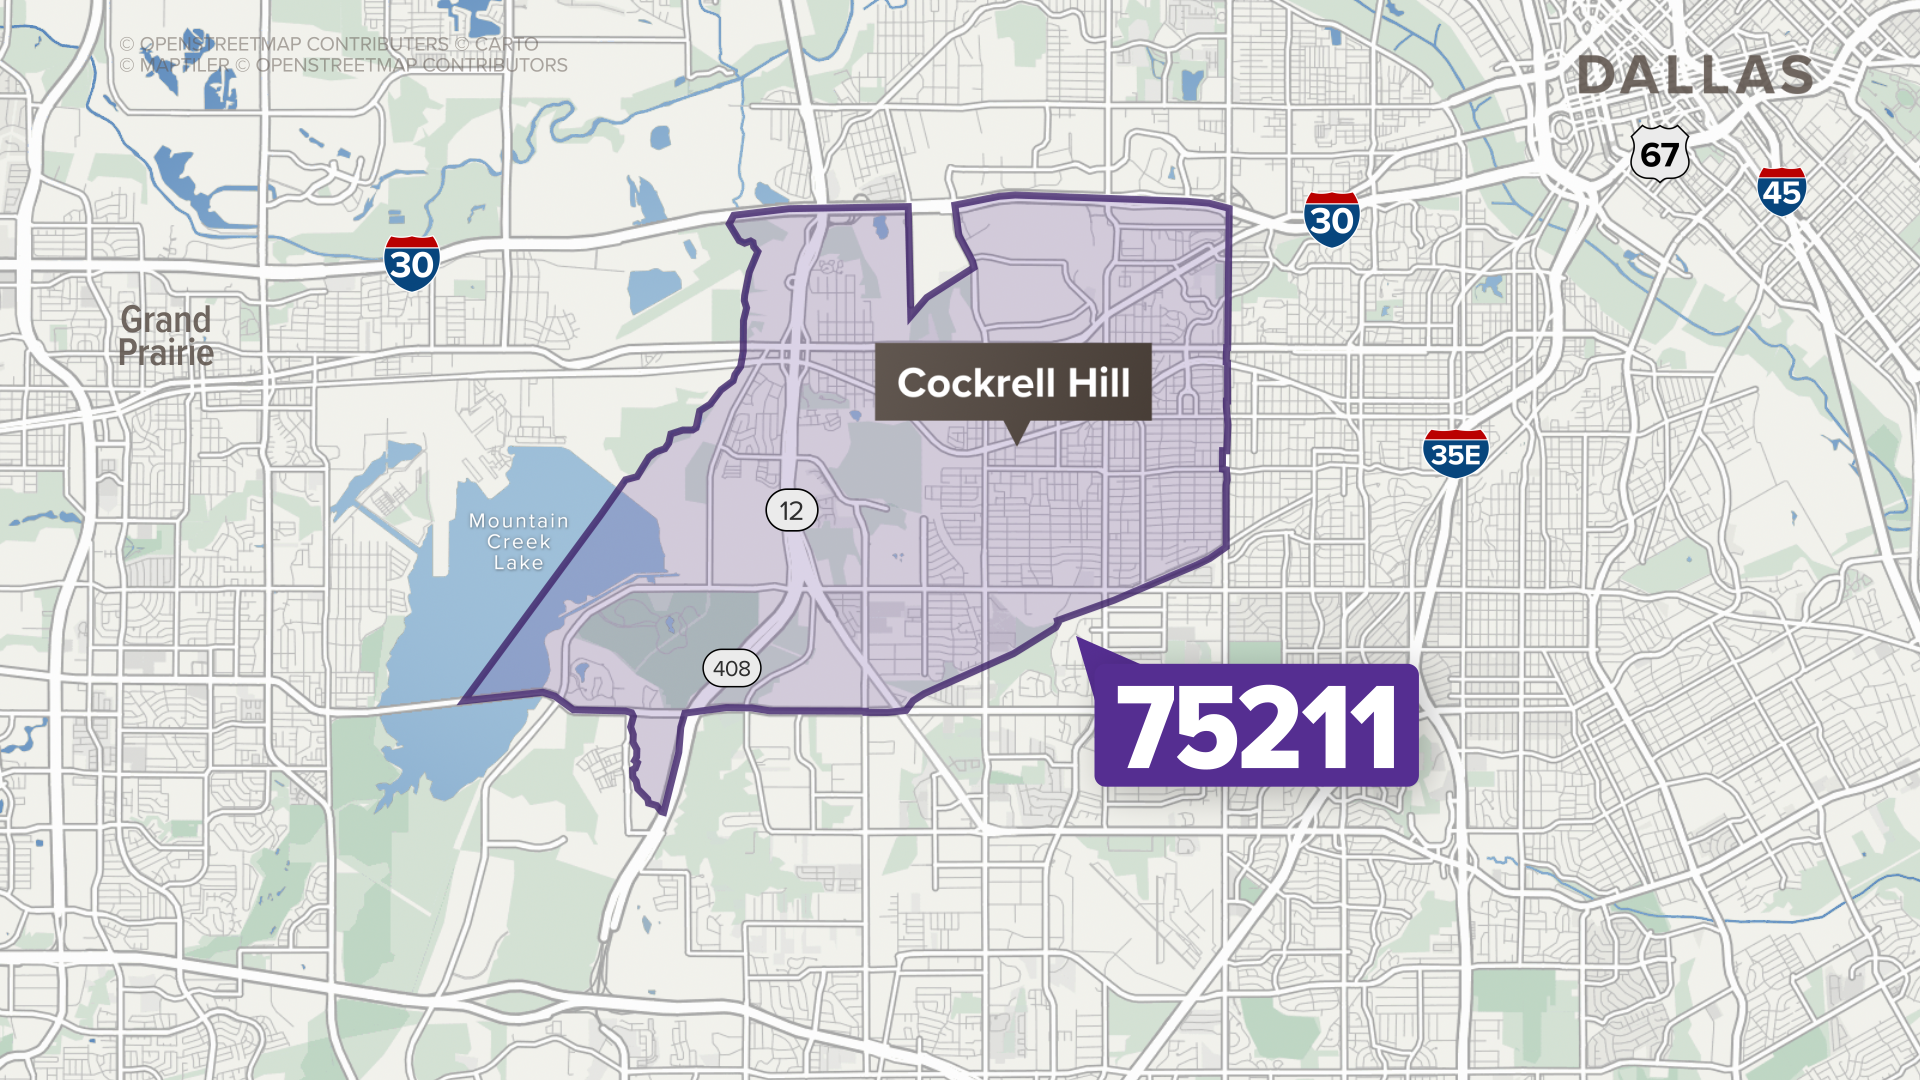 The 75211 zip code is home to more COVID-19 cases than anywhere else in Dallas: positive test results at a rate 60 percent greater than the Dallas County average.